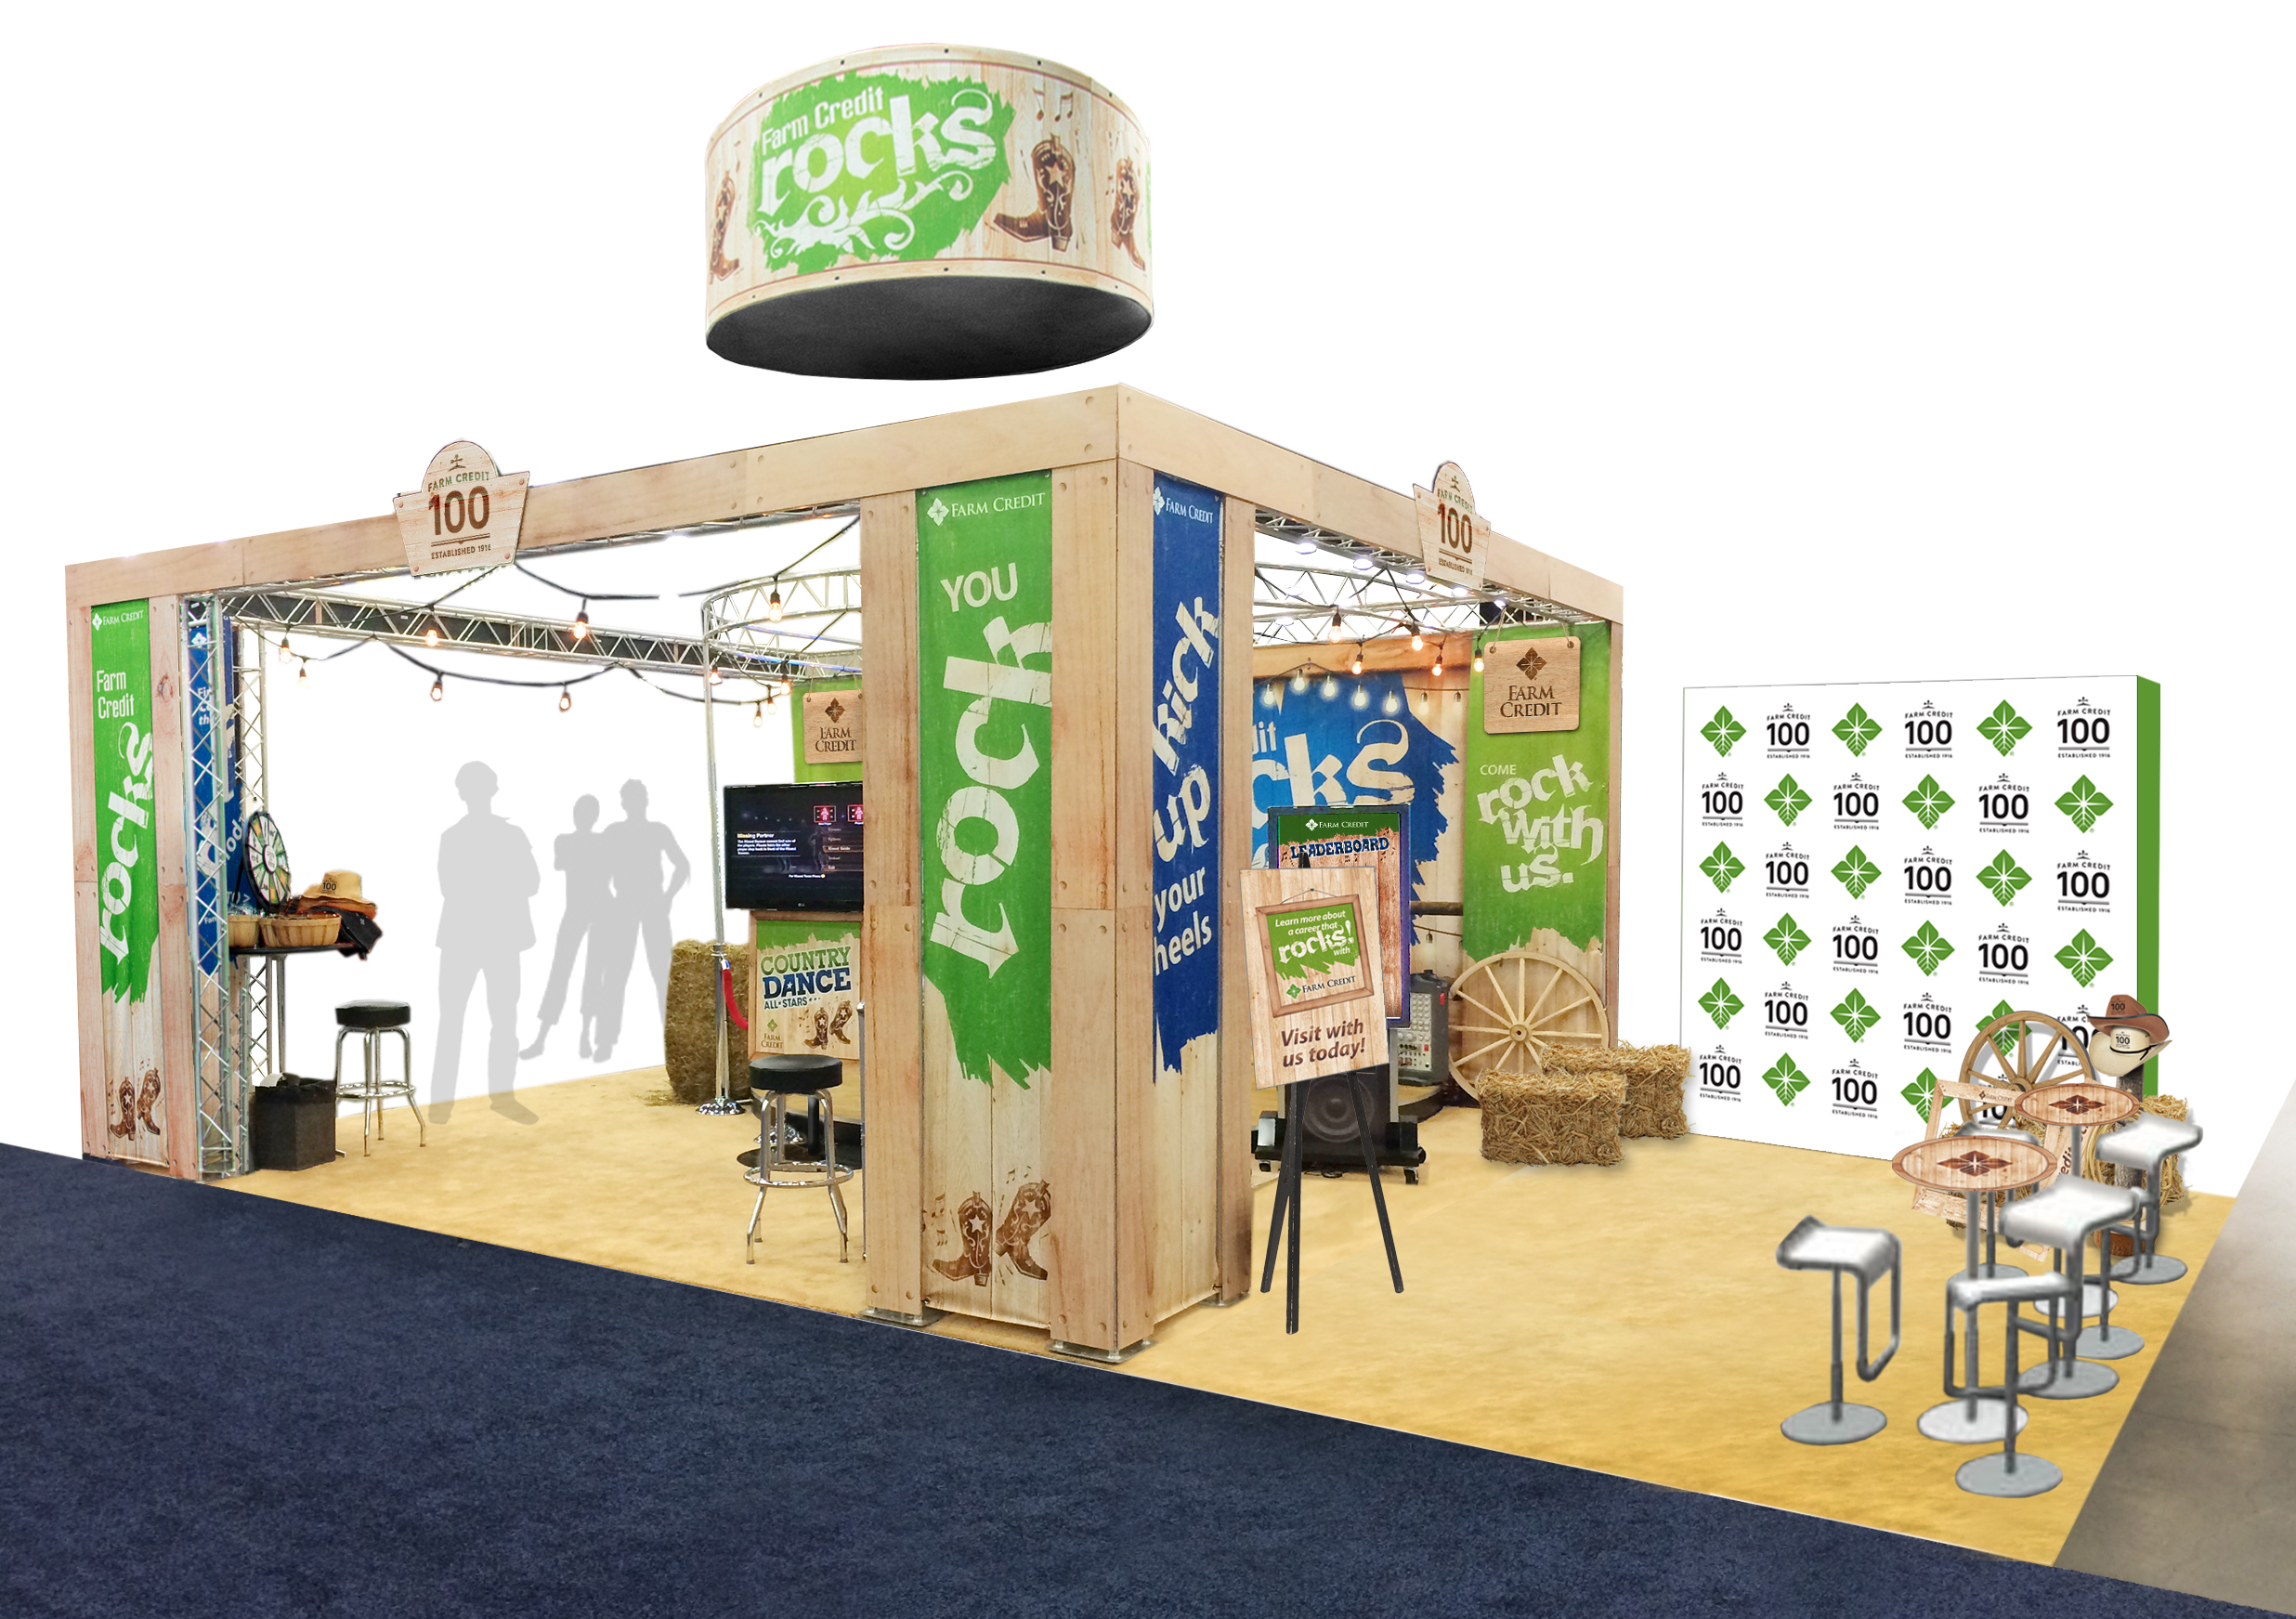 Farm Credit will be rockin' at booth #1519 at the FFA National Convention and Expo